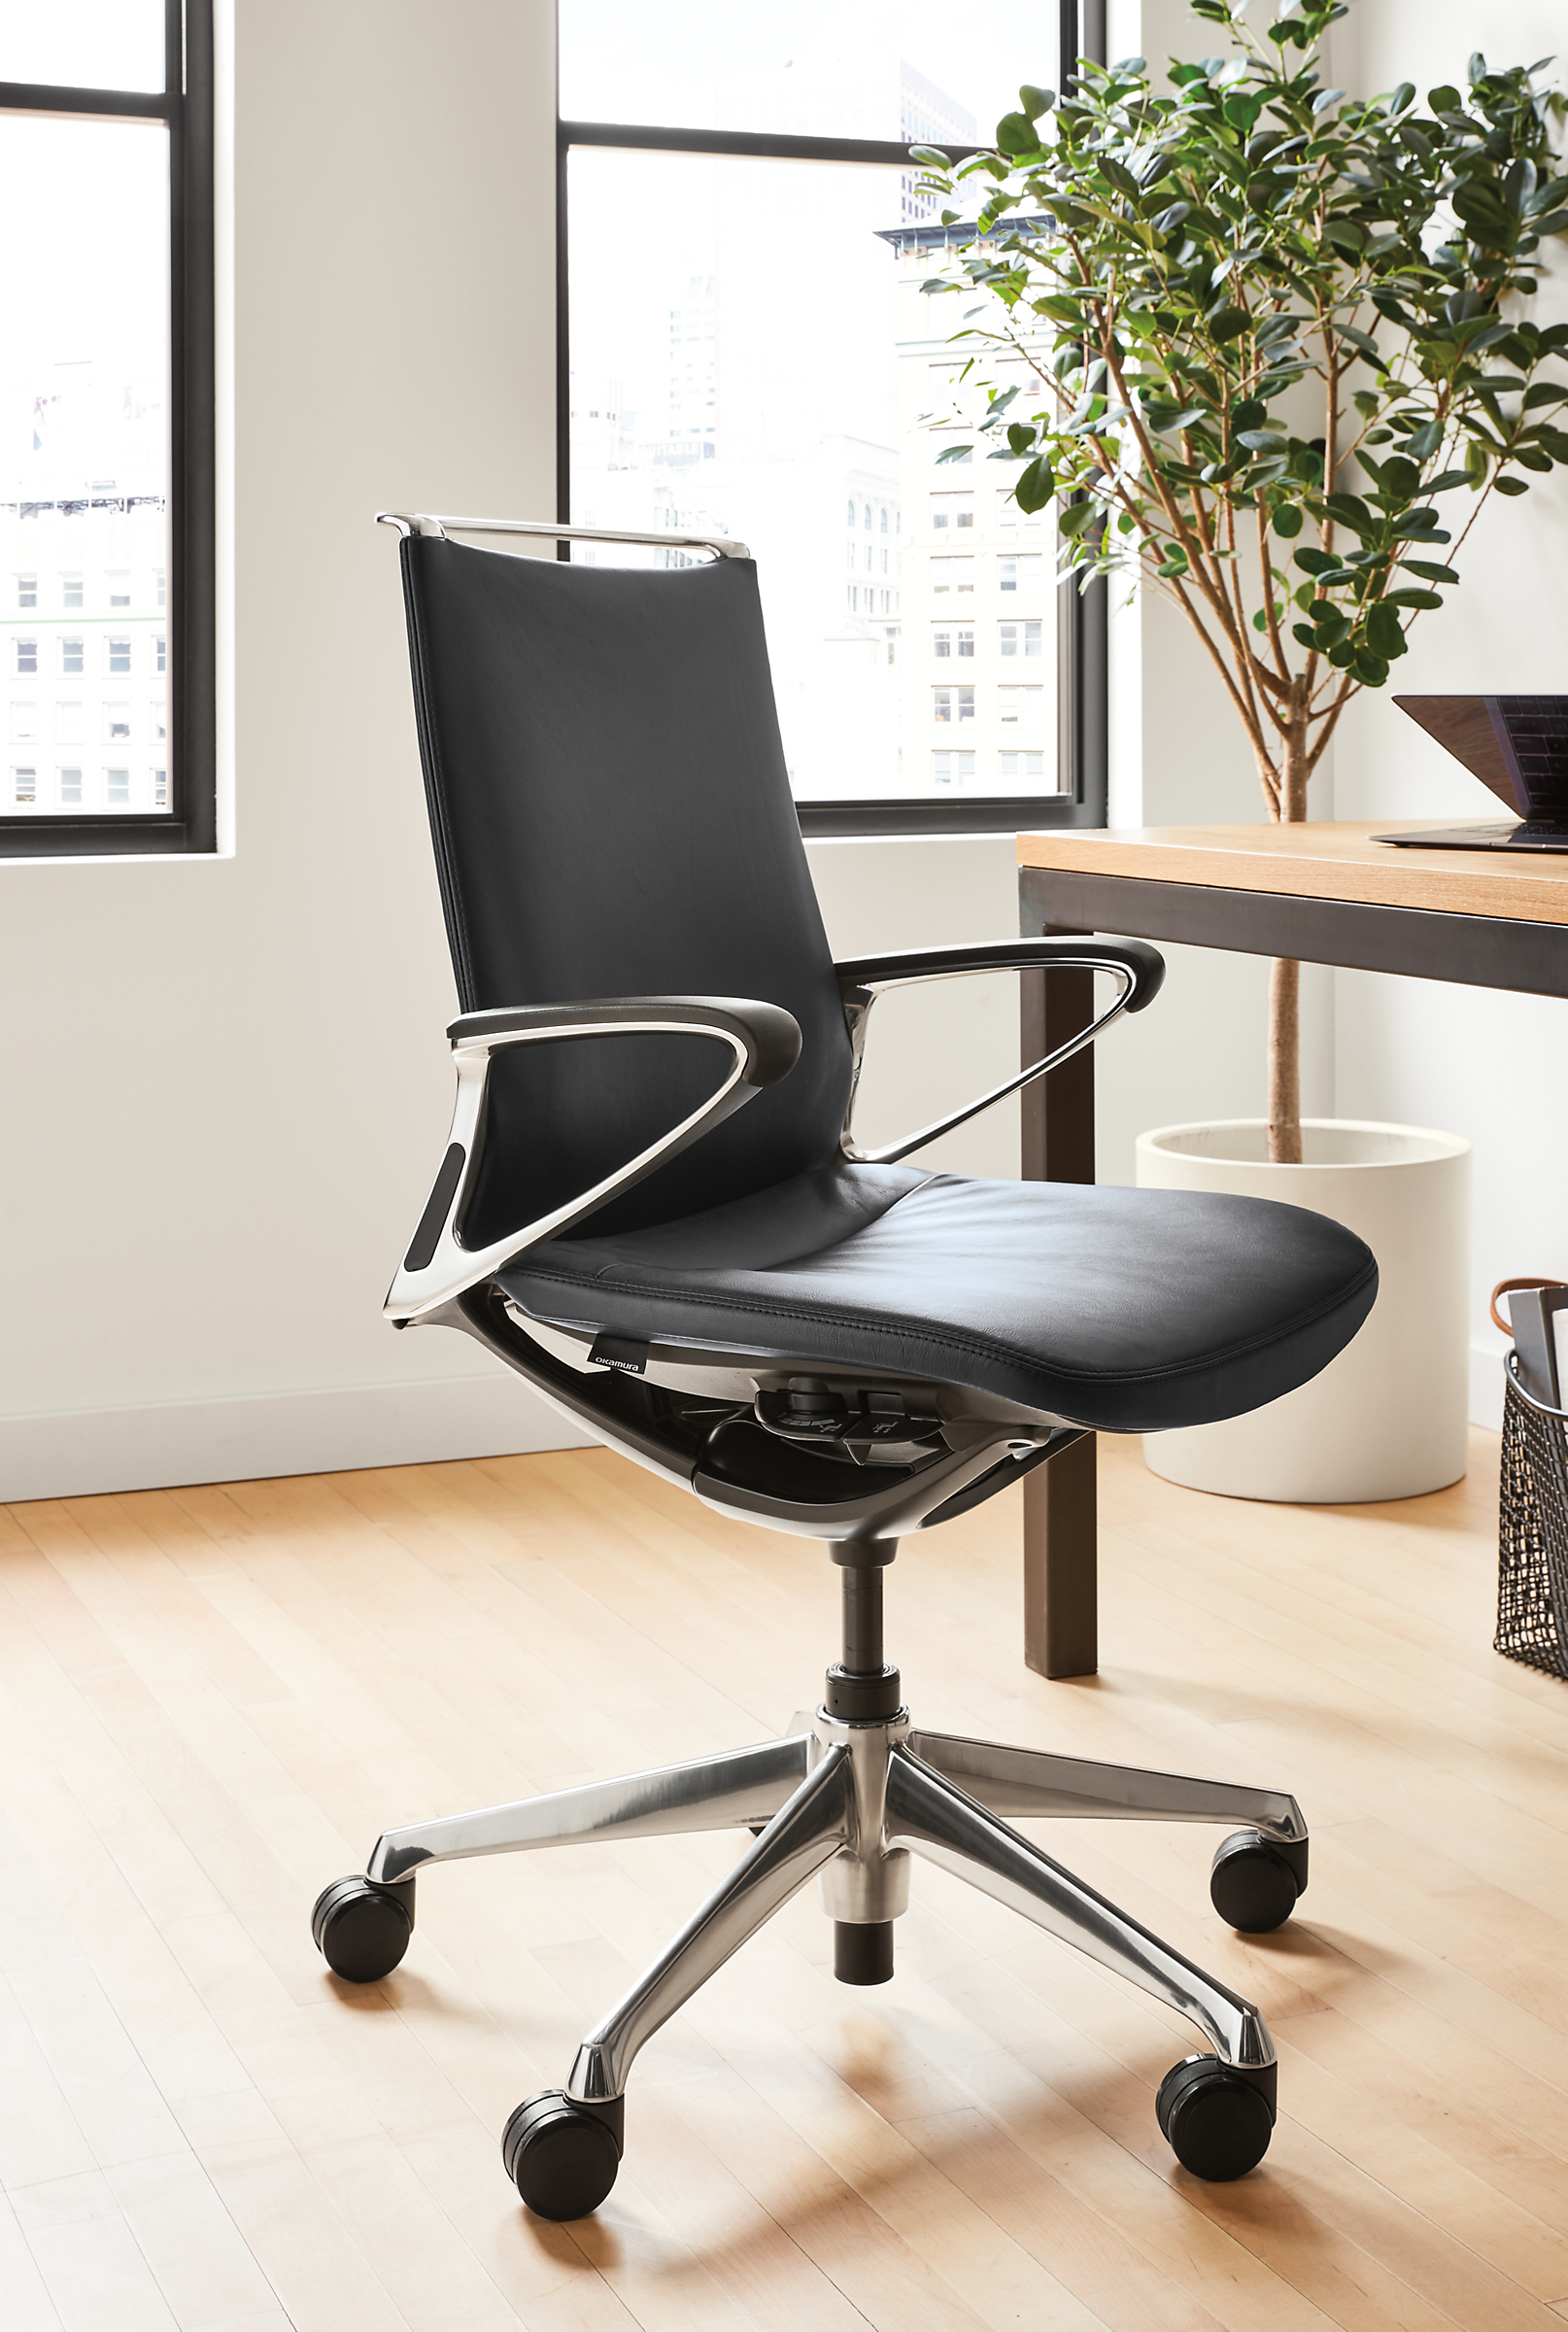 Office setting with Plimode office chair in polished aluminum with black leather.